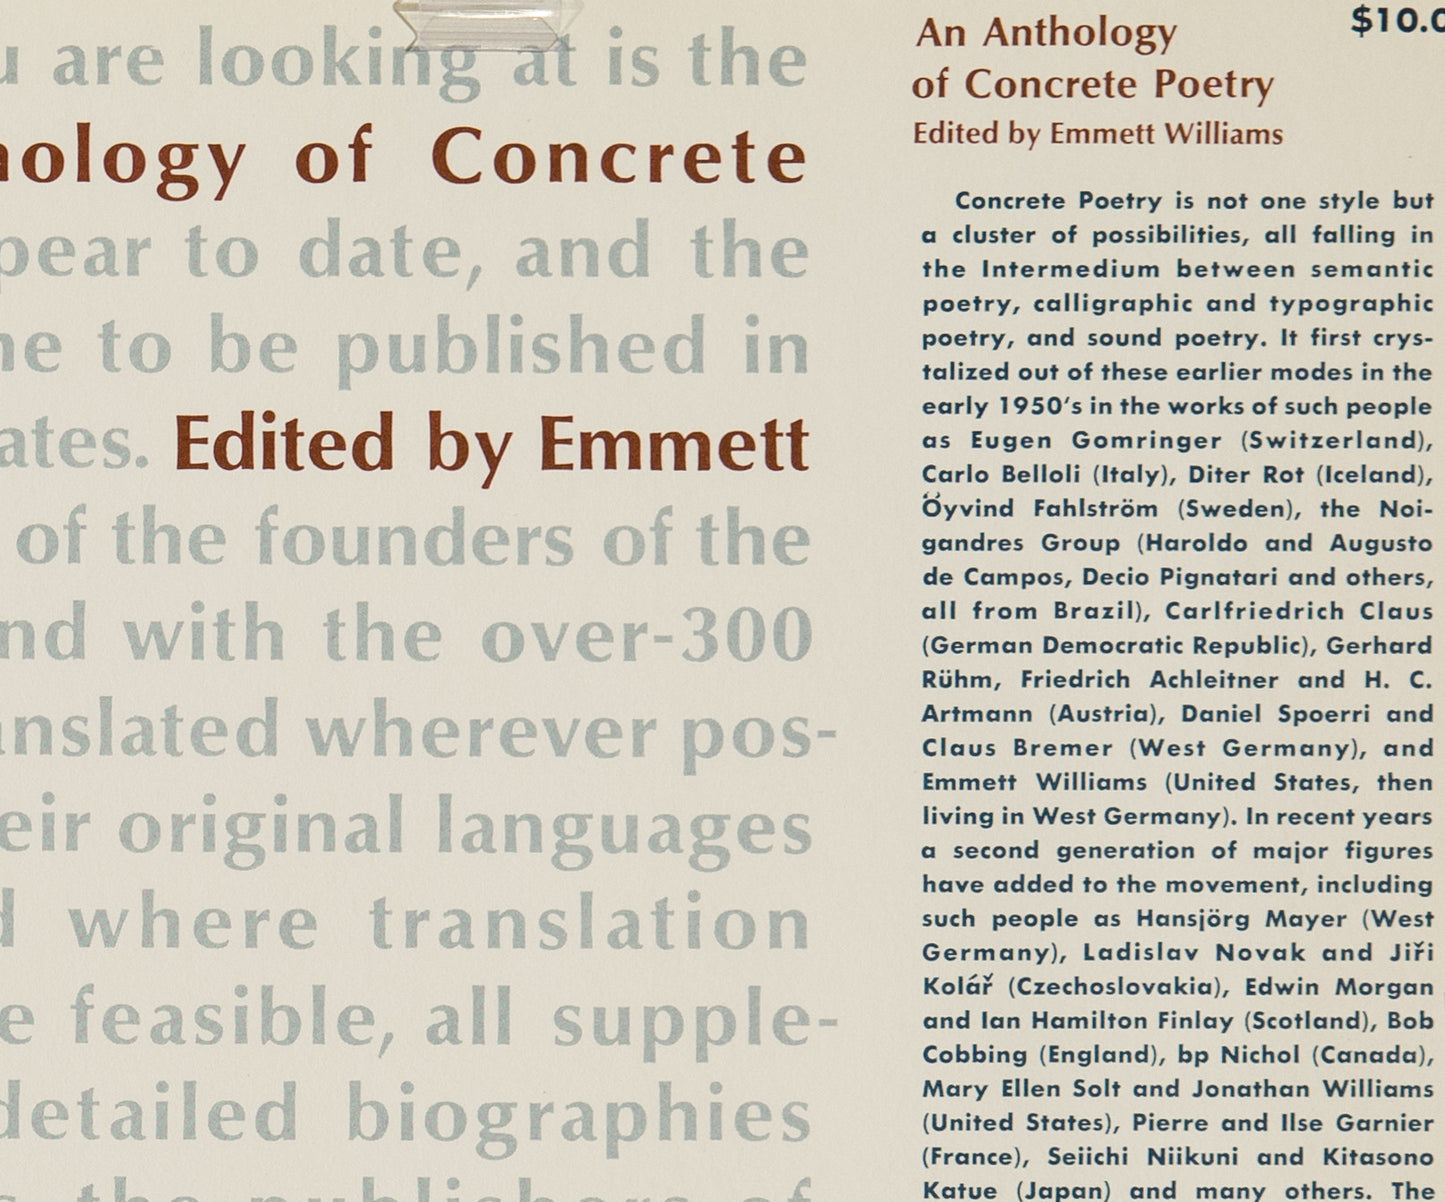 Unfolded Dust Jacket - An Anthology of Concrete Poetry. Edited by Emmett Williams